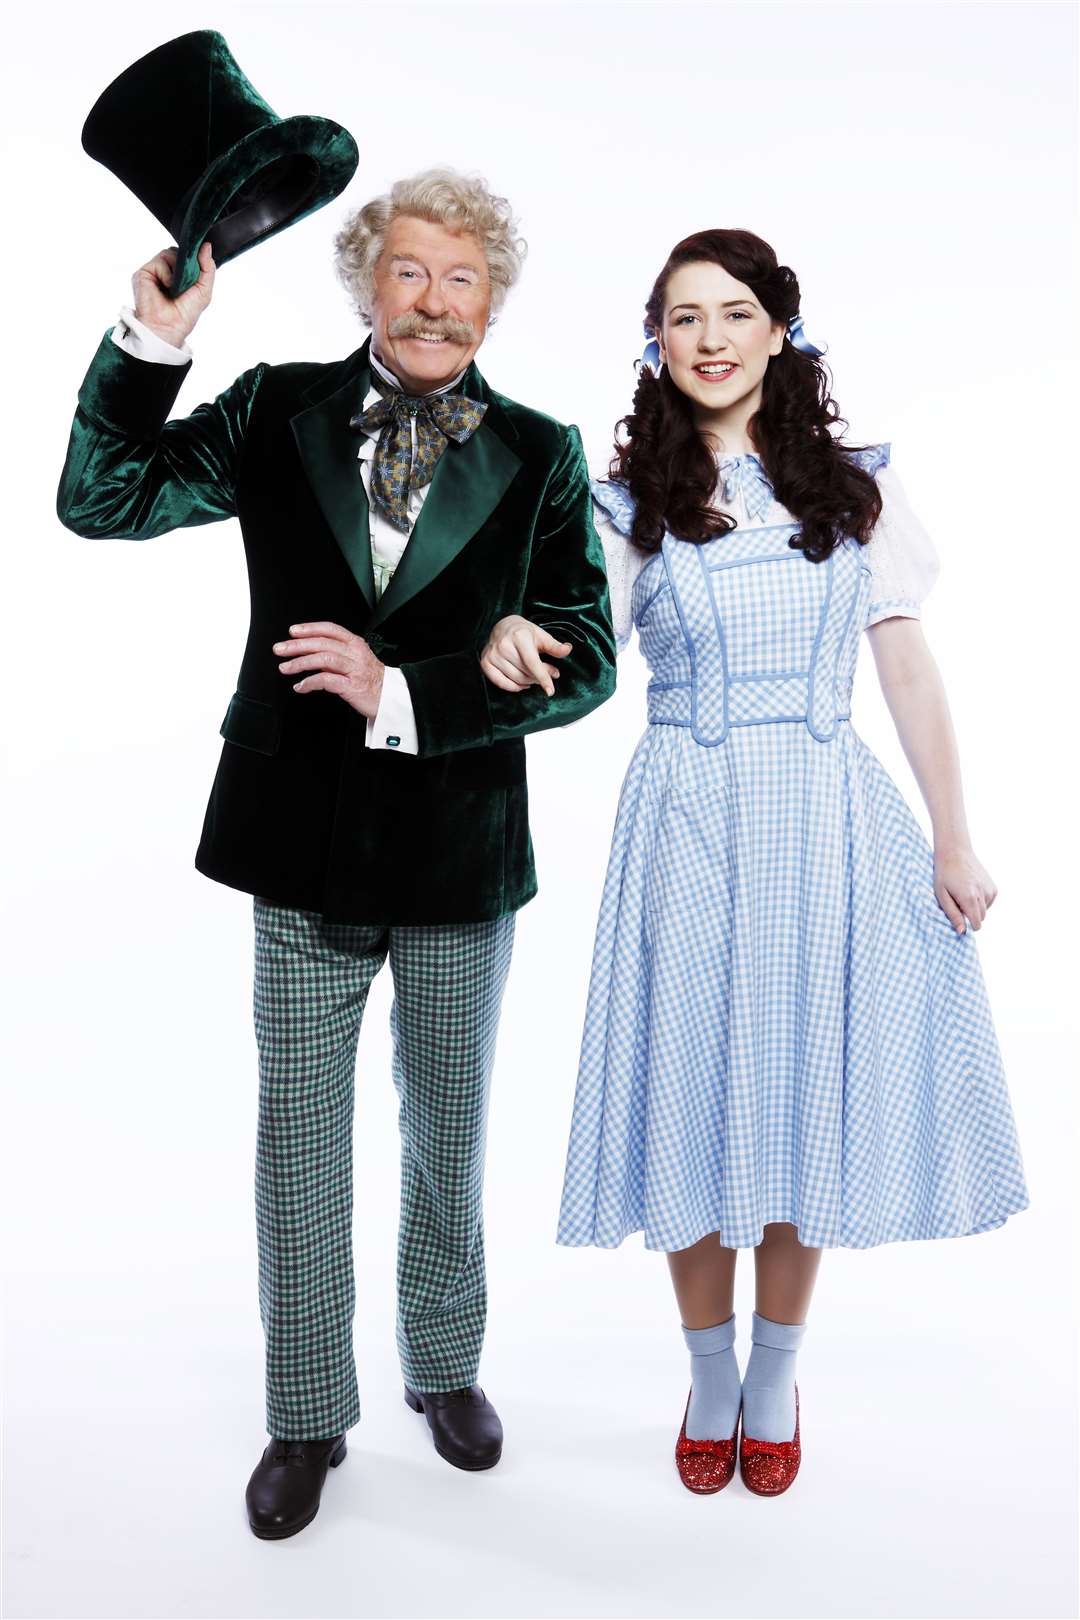 Michael Crawford and Danielle Hope in the The Wizard of Oz at the London Palladium in 2011. Picture: Simon Turtle